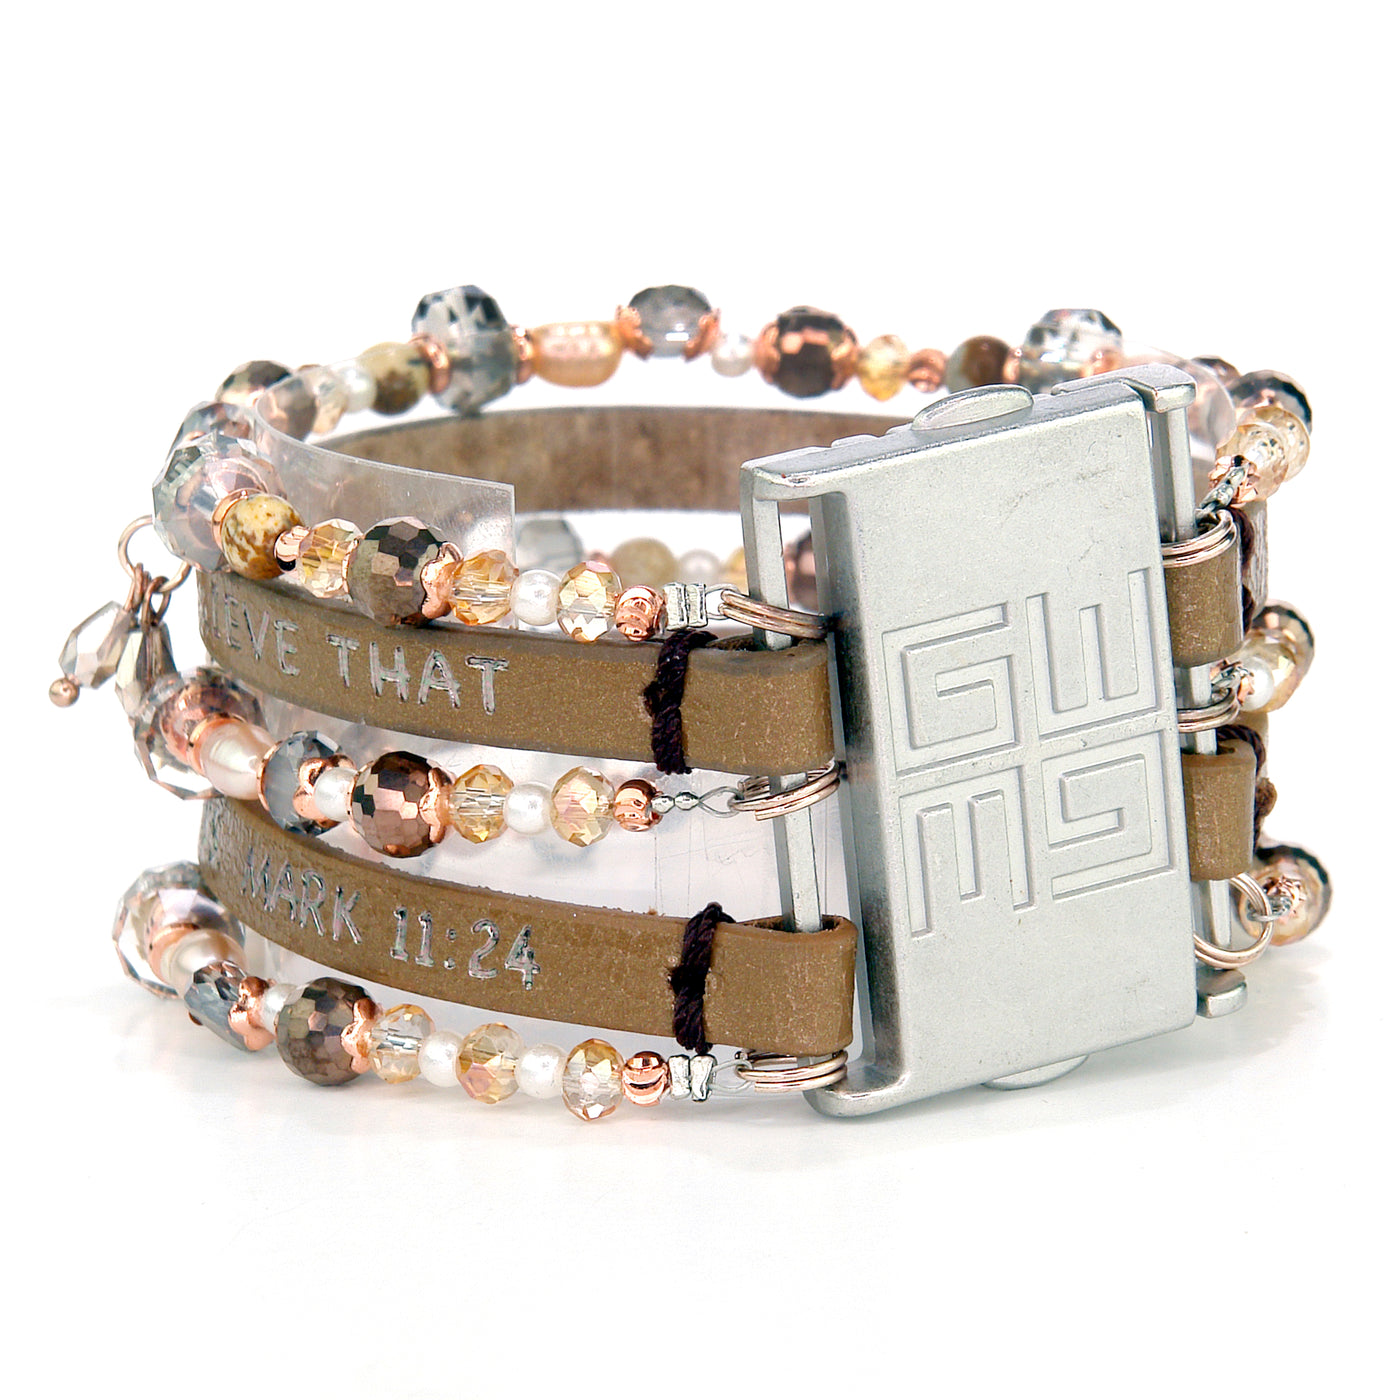 Beautiful Cuff Bracelet-Good Work(s) Make A Difference® | Christian and Inspirational Jewelry Company in Vernon, California